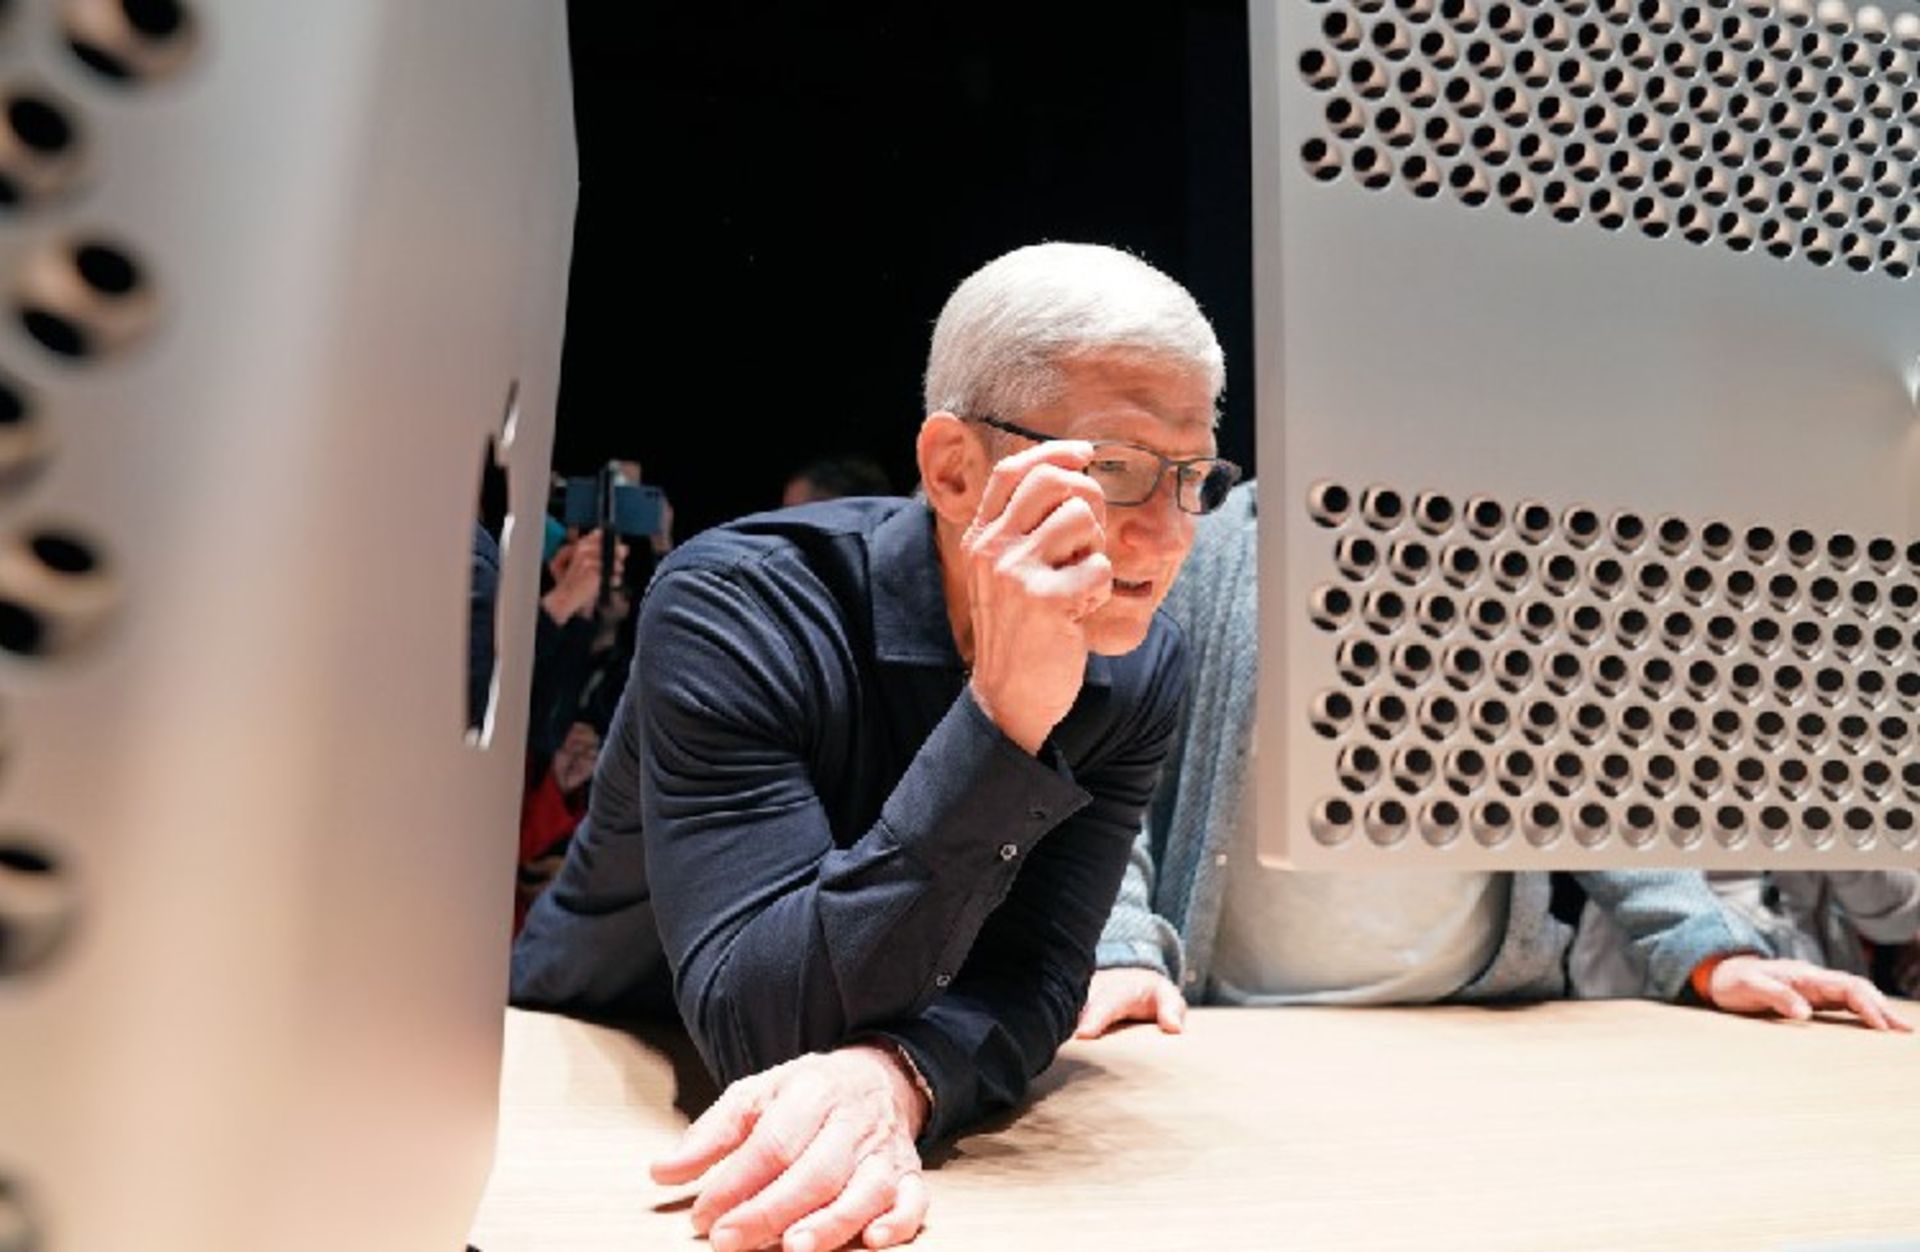 Apple CEO Tim Cook inspects one of the company